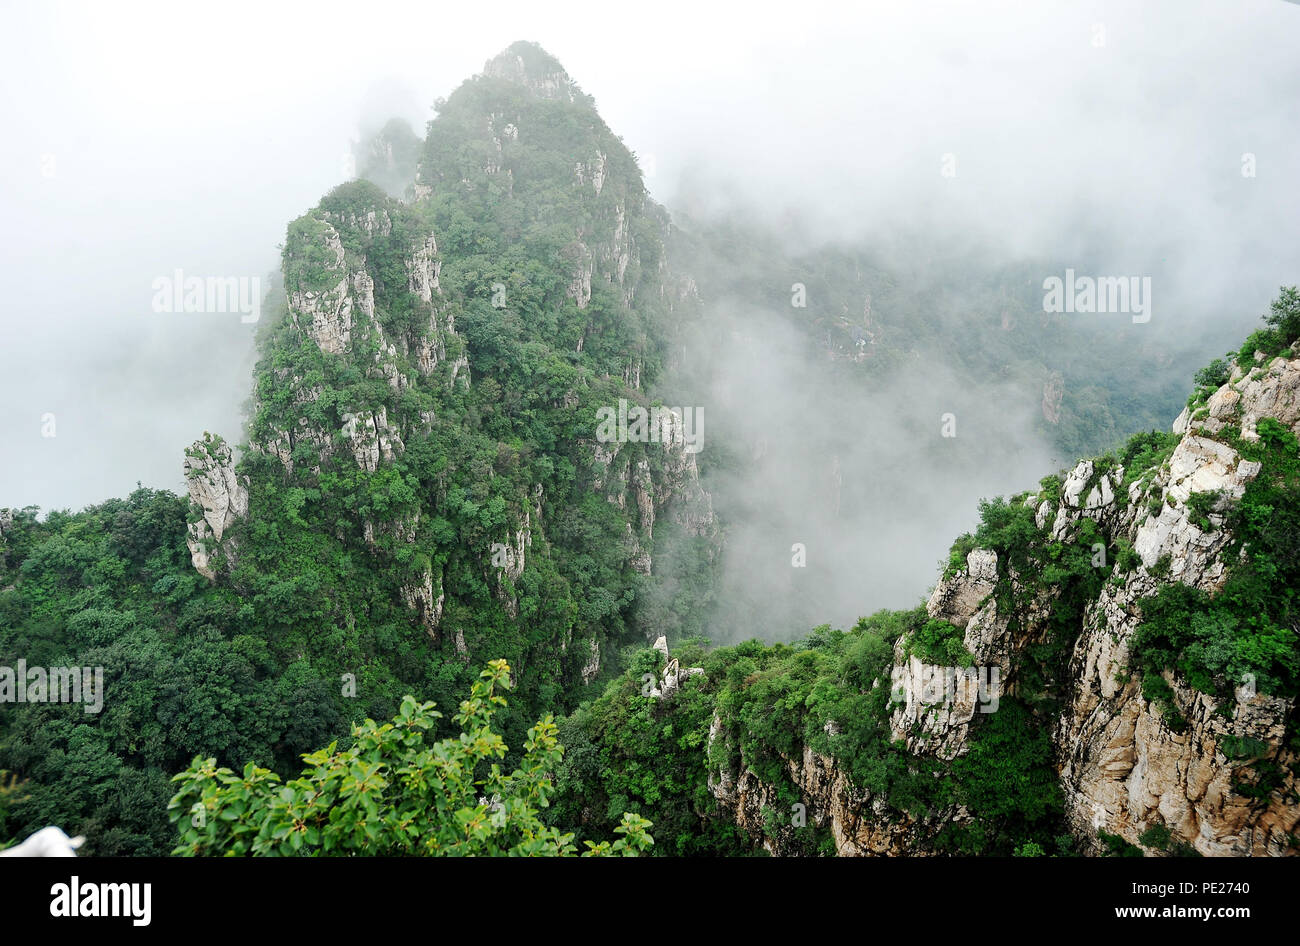 (180812) -- YIXIAN, Aug. 12, 2018 (Xinhua) -- Photo taken on Aug. 12, 2018 shows the view of Langya Mountain in Yixian County, north China's Hebei Province. Clouds and fog made Langya Mountain indistinct after a rainfall. Stock Photo